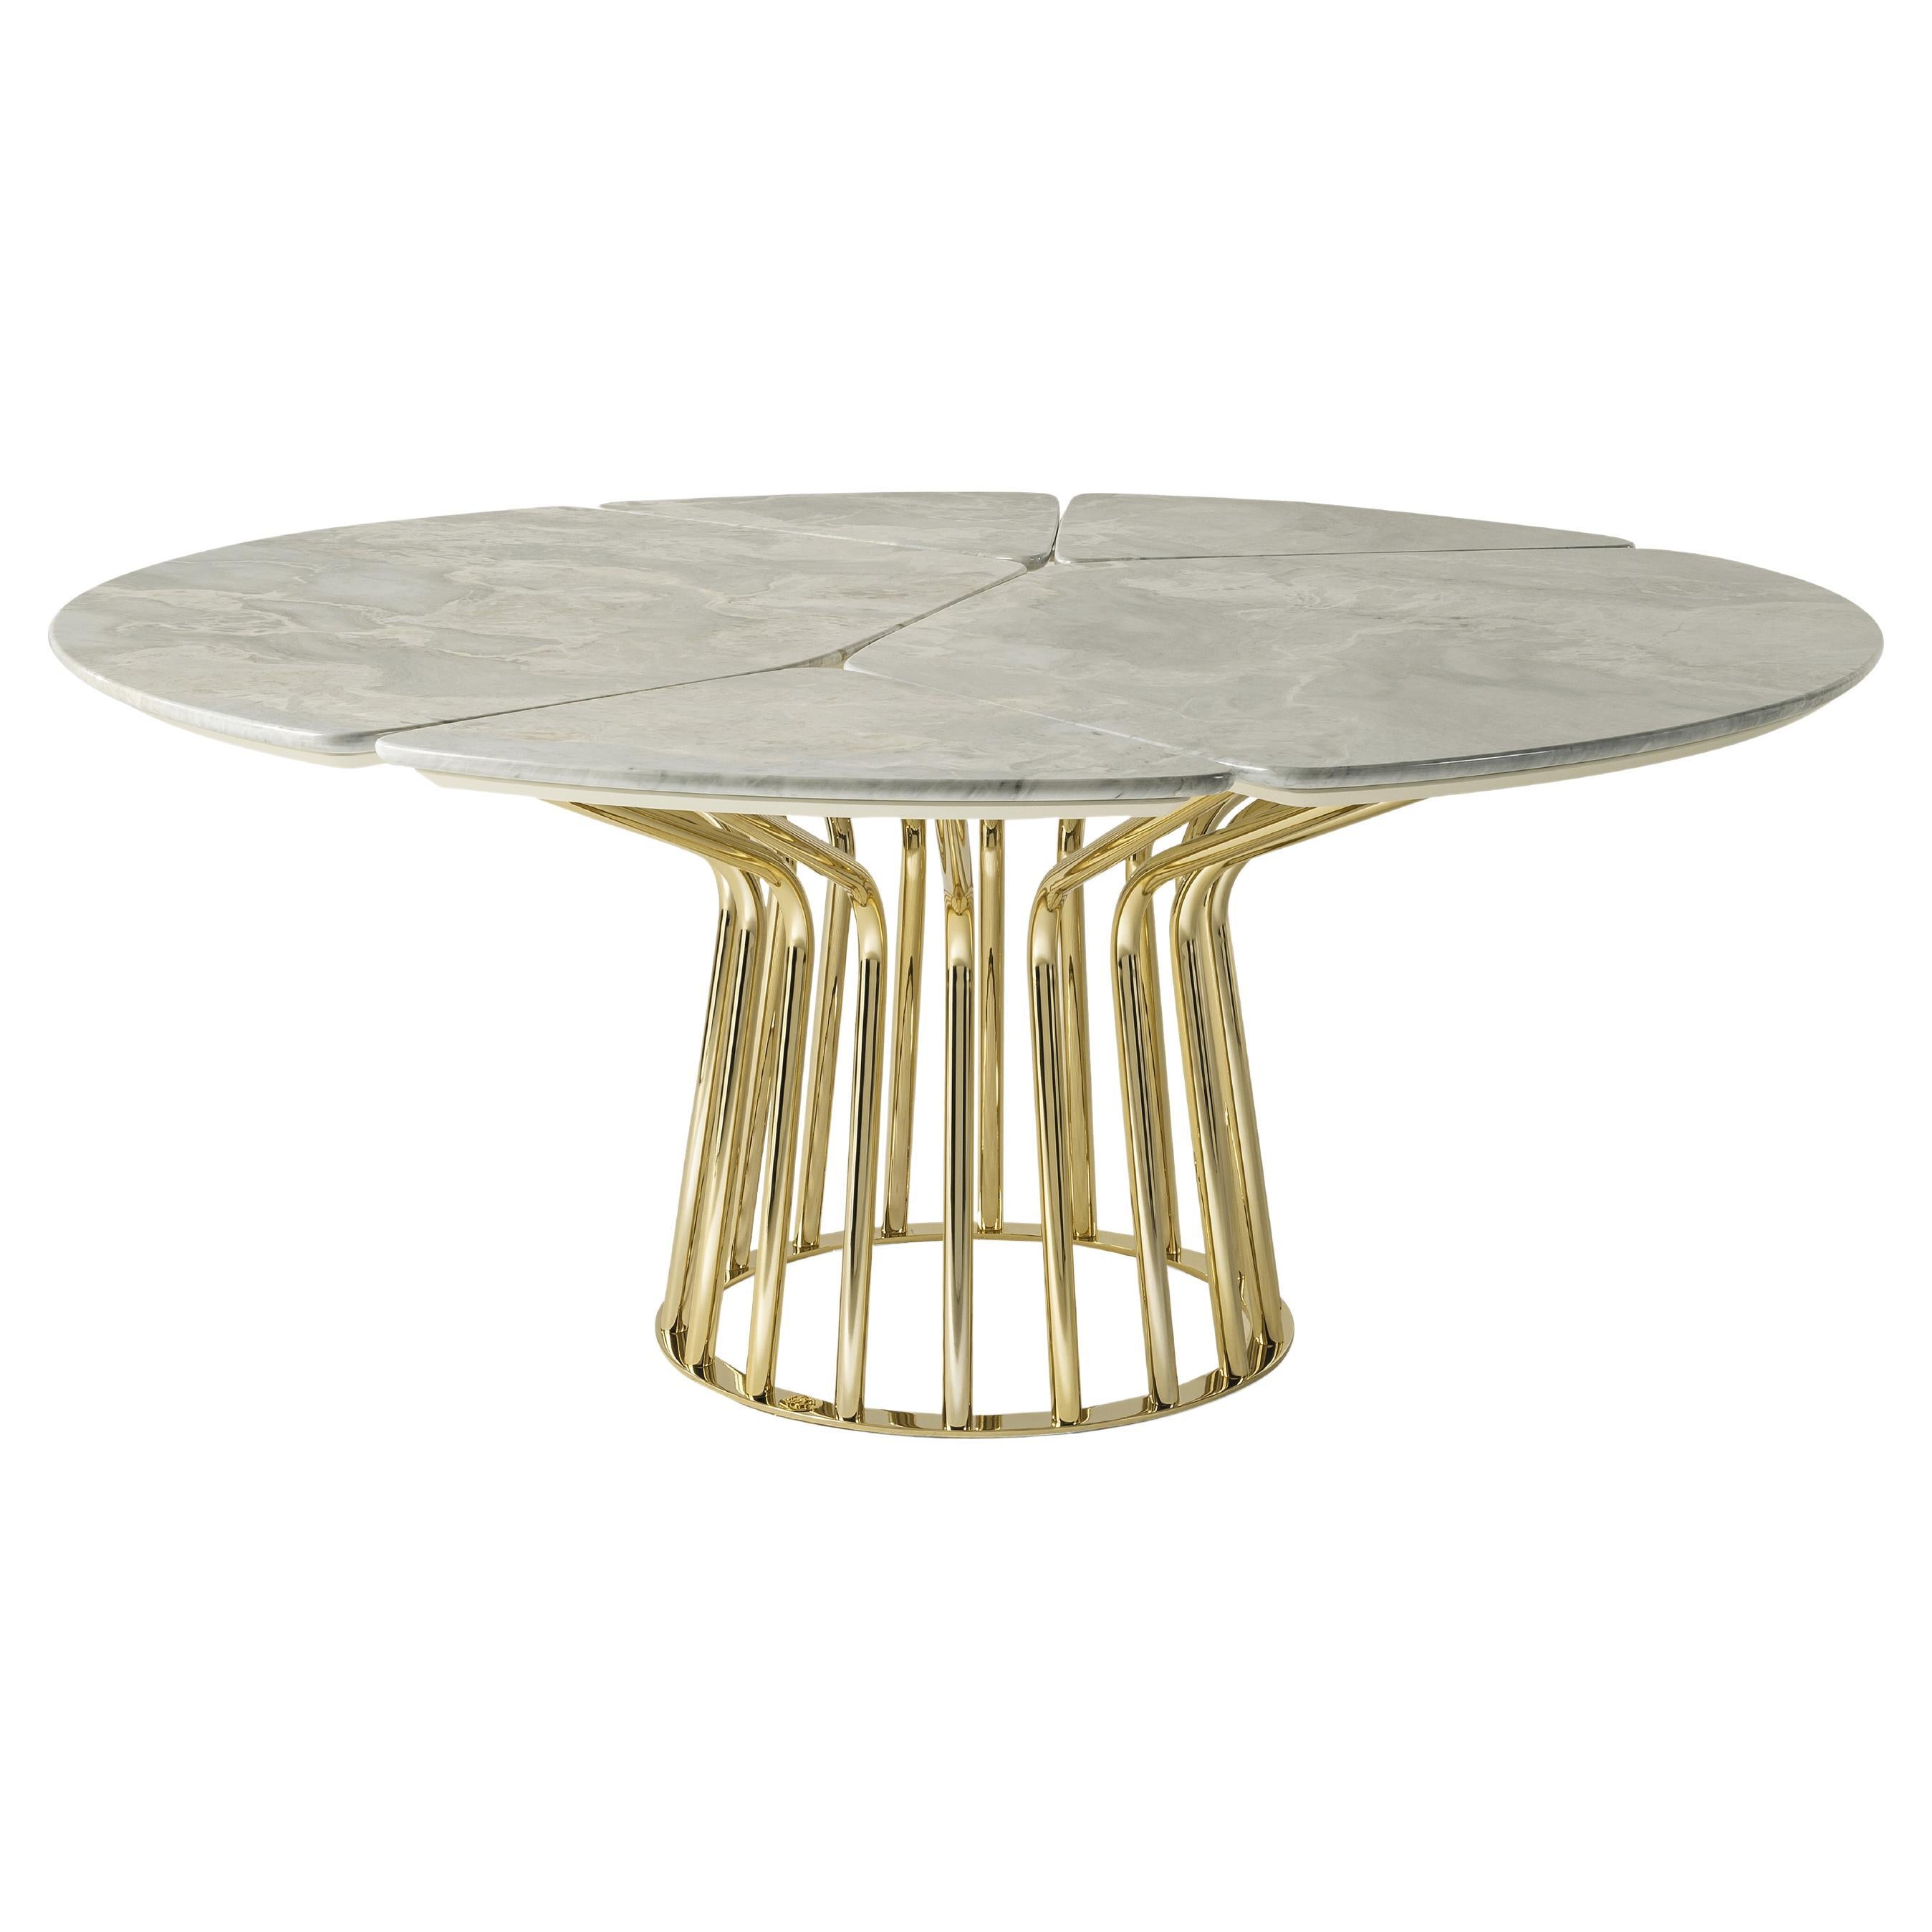 21st Century Baobab Table with Marble Top by Roberto Cavalli Home Interiors For Sale